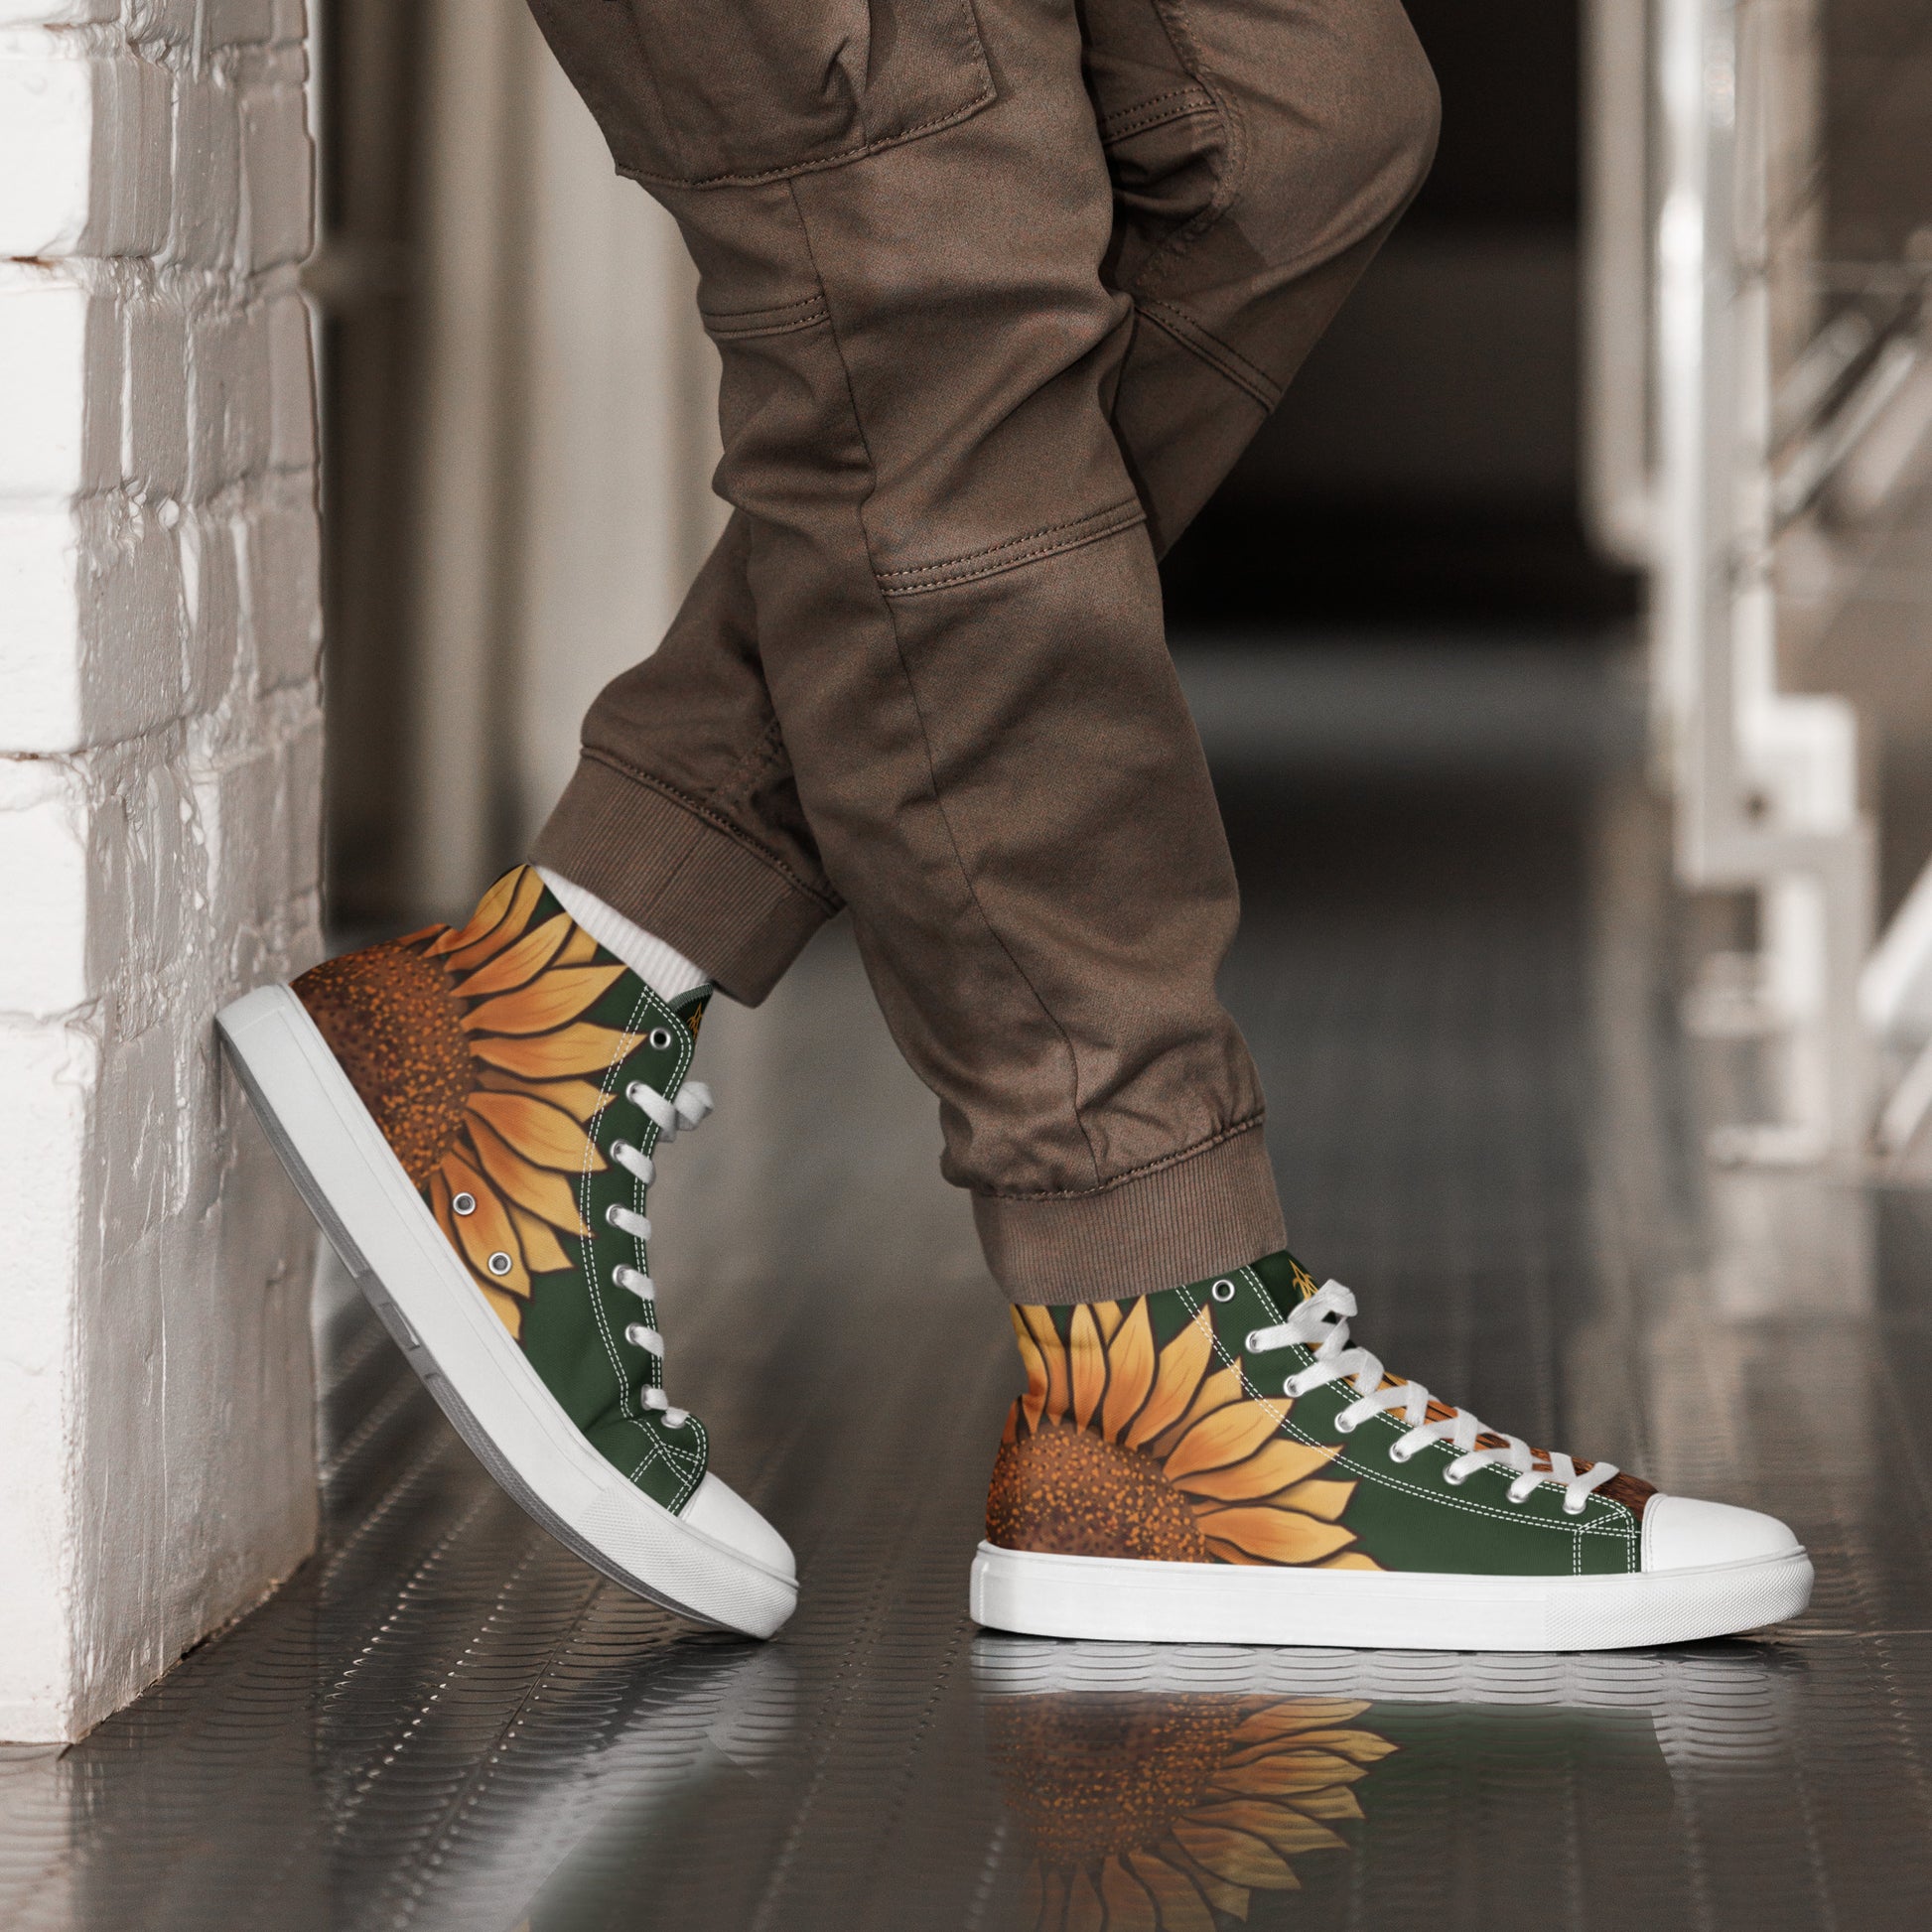 A model wears a pair of high top shoes with a large sunflower on the heel and a forest green background.